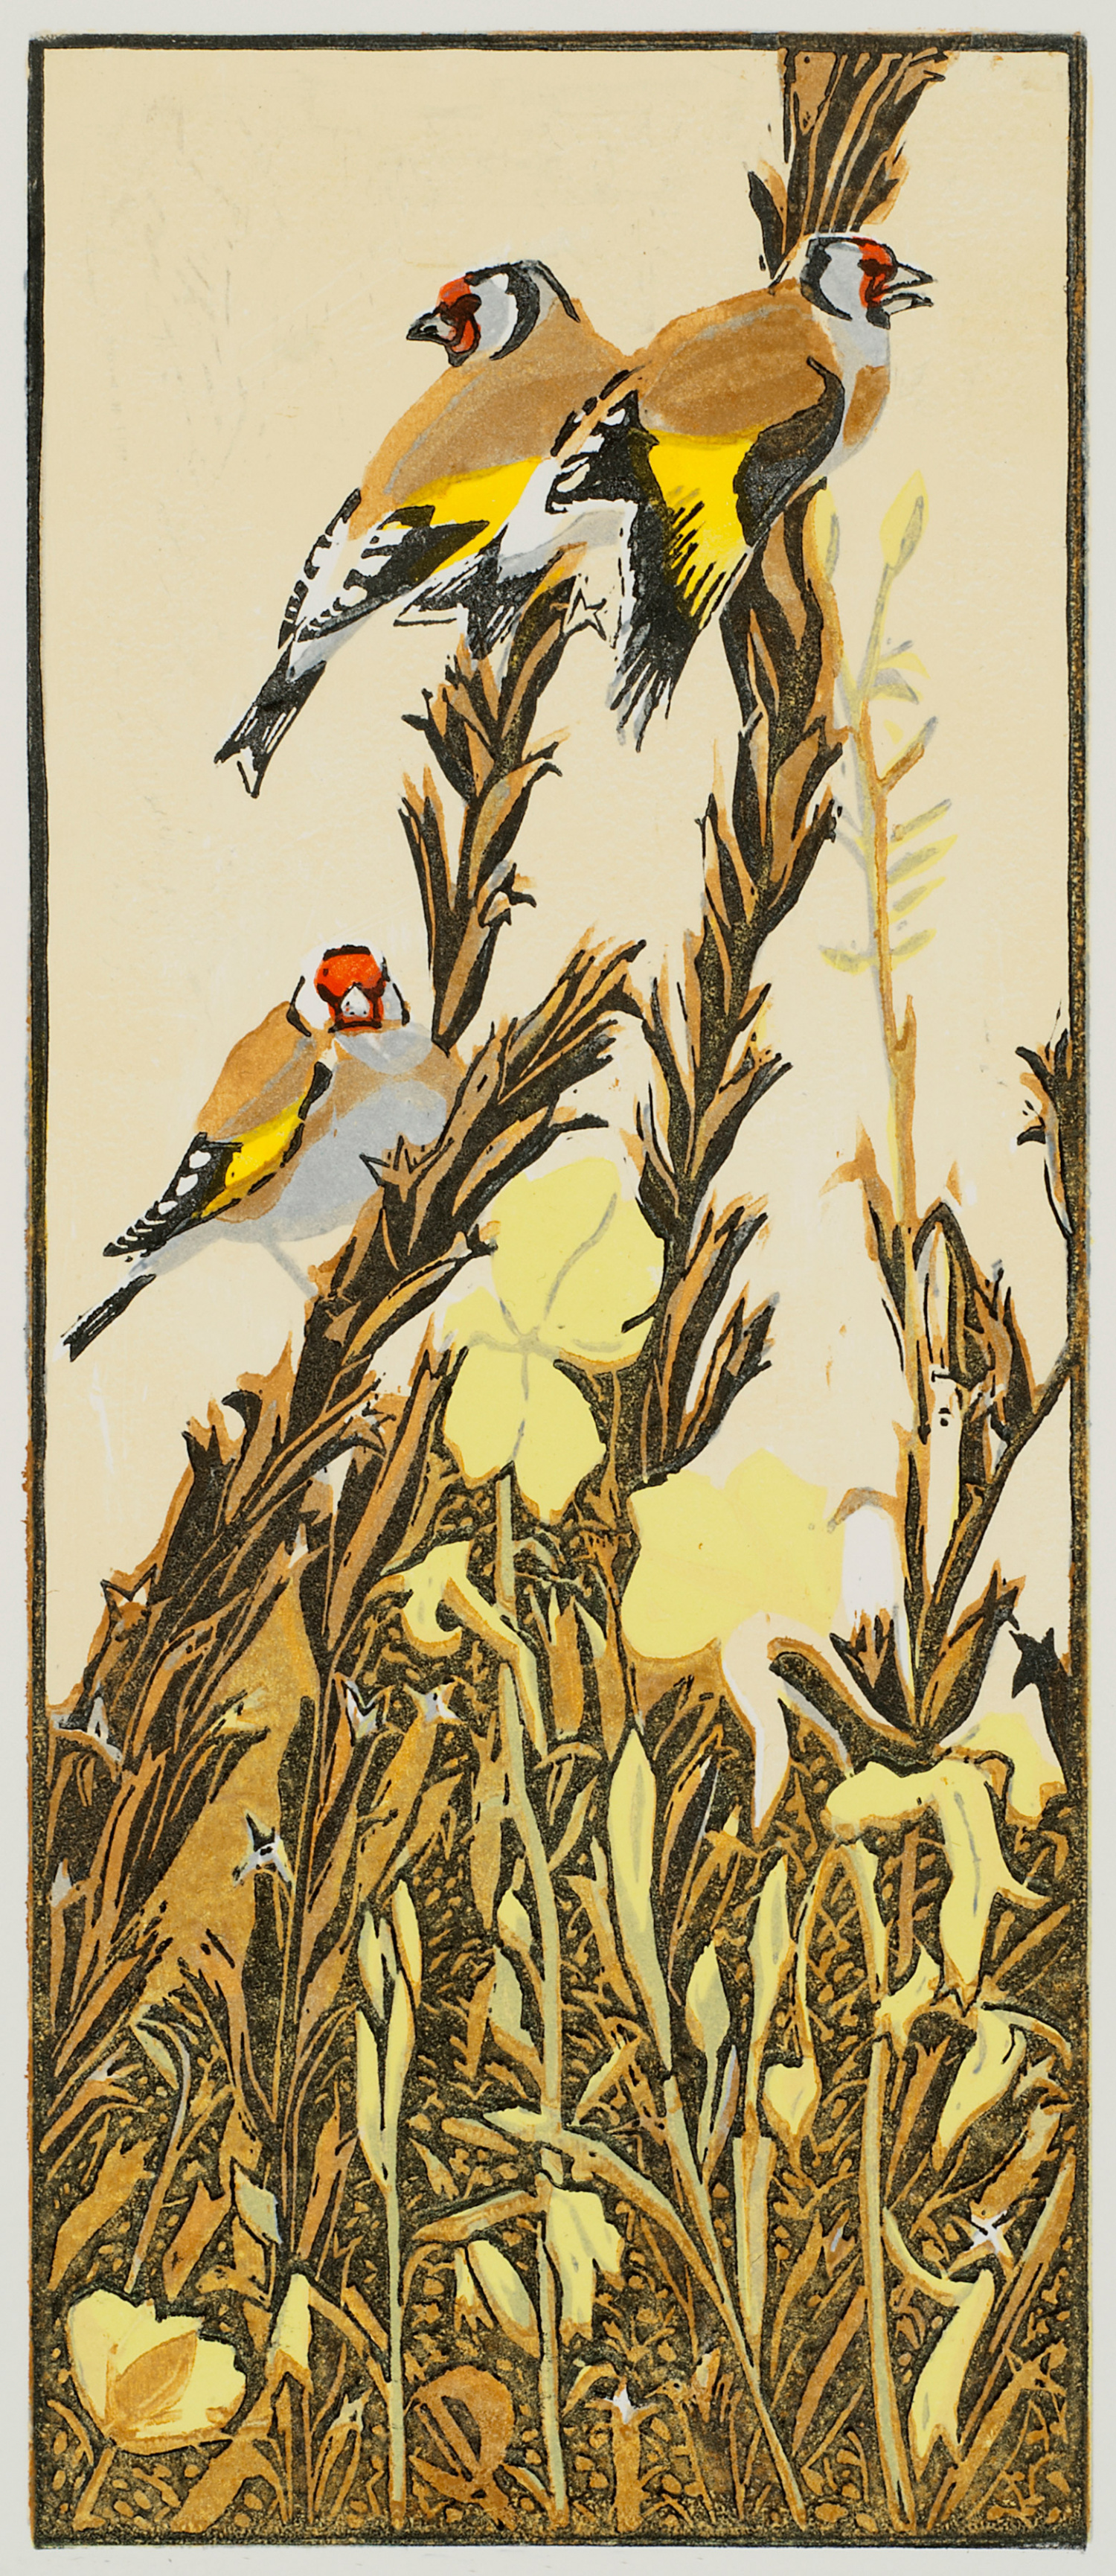 Goldfinches & Evening Primroses by Robert Greenhalf